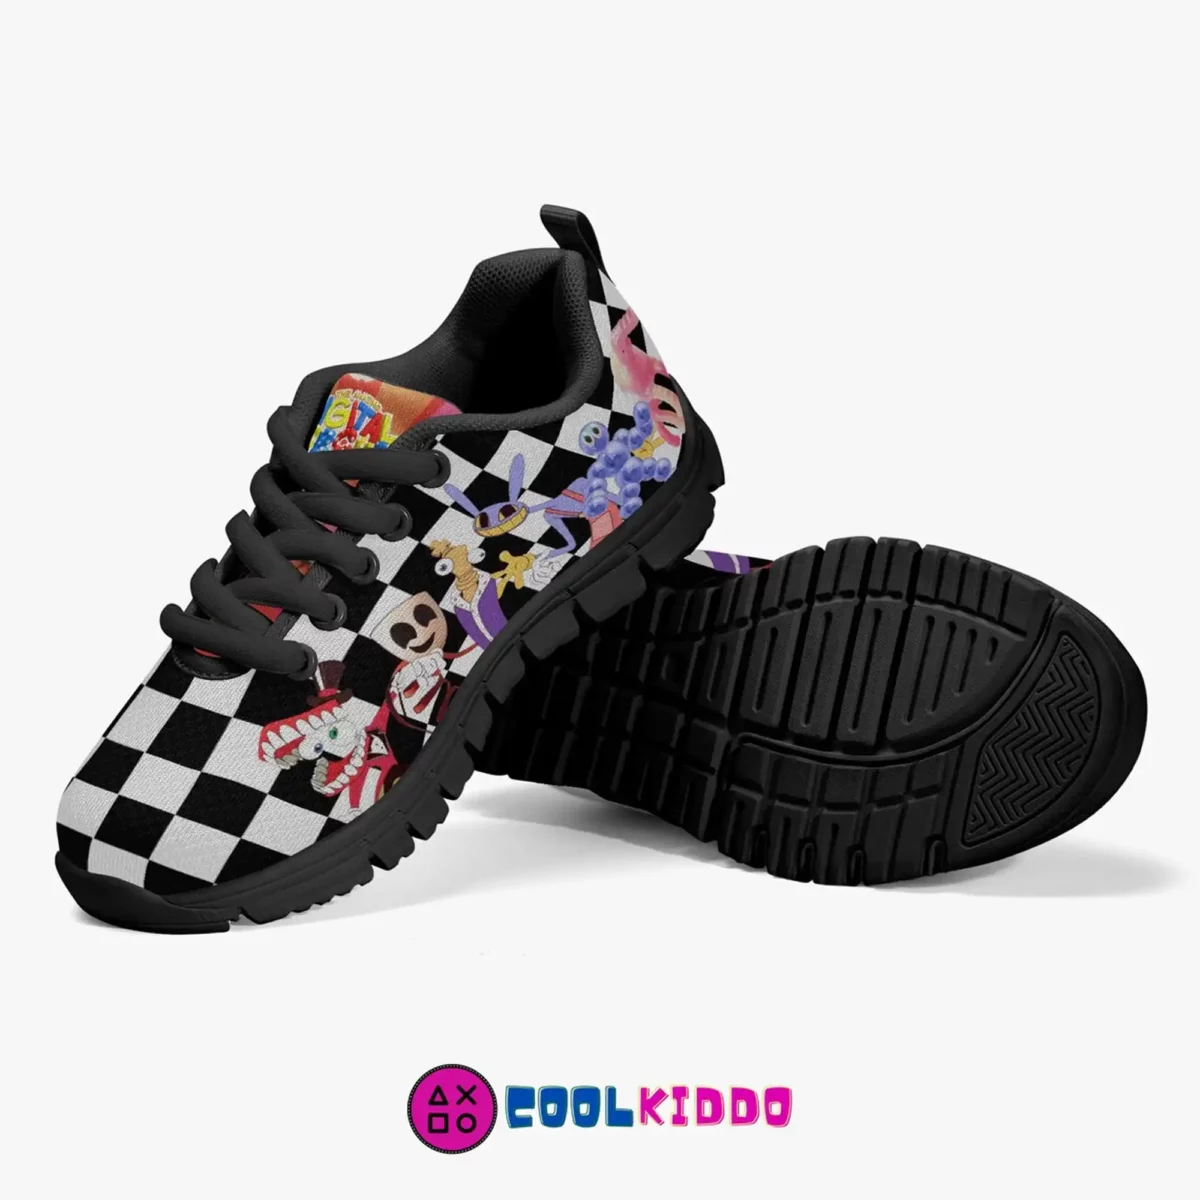 Personalized Shoes | The Amazing Digital Circus Animated Series Inspired Lightweight Mesh Sneakers Cool Kiddo 14